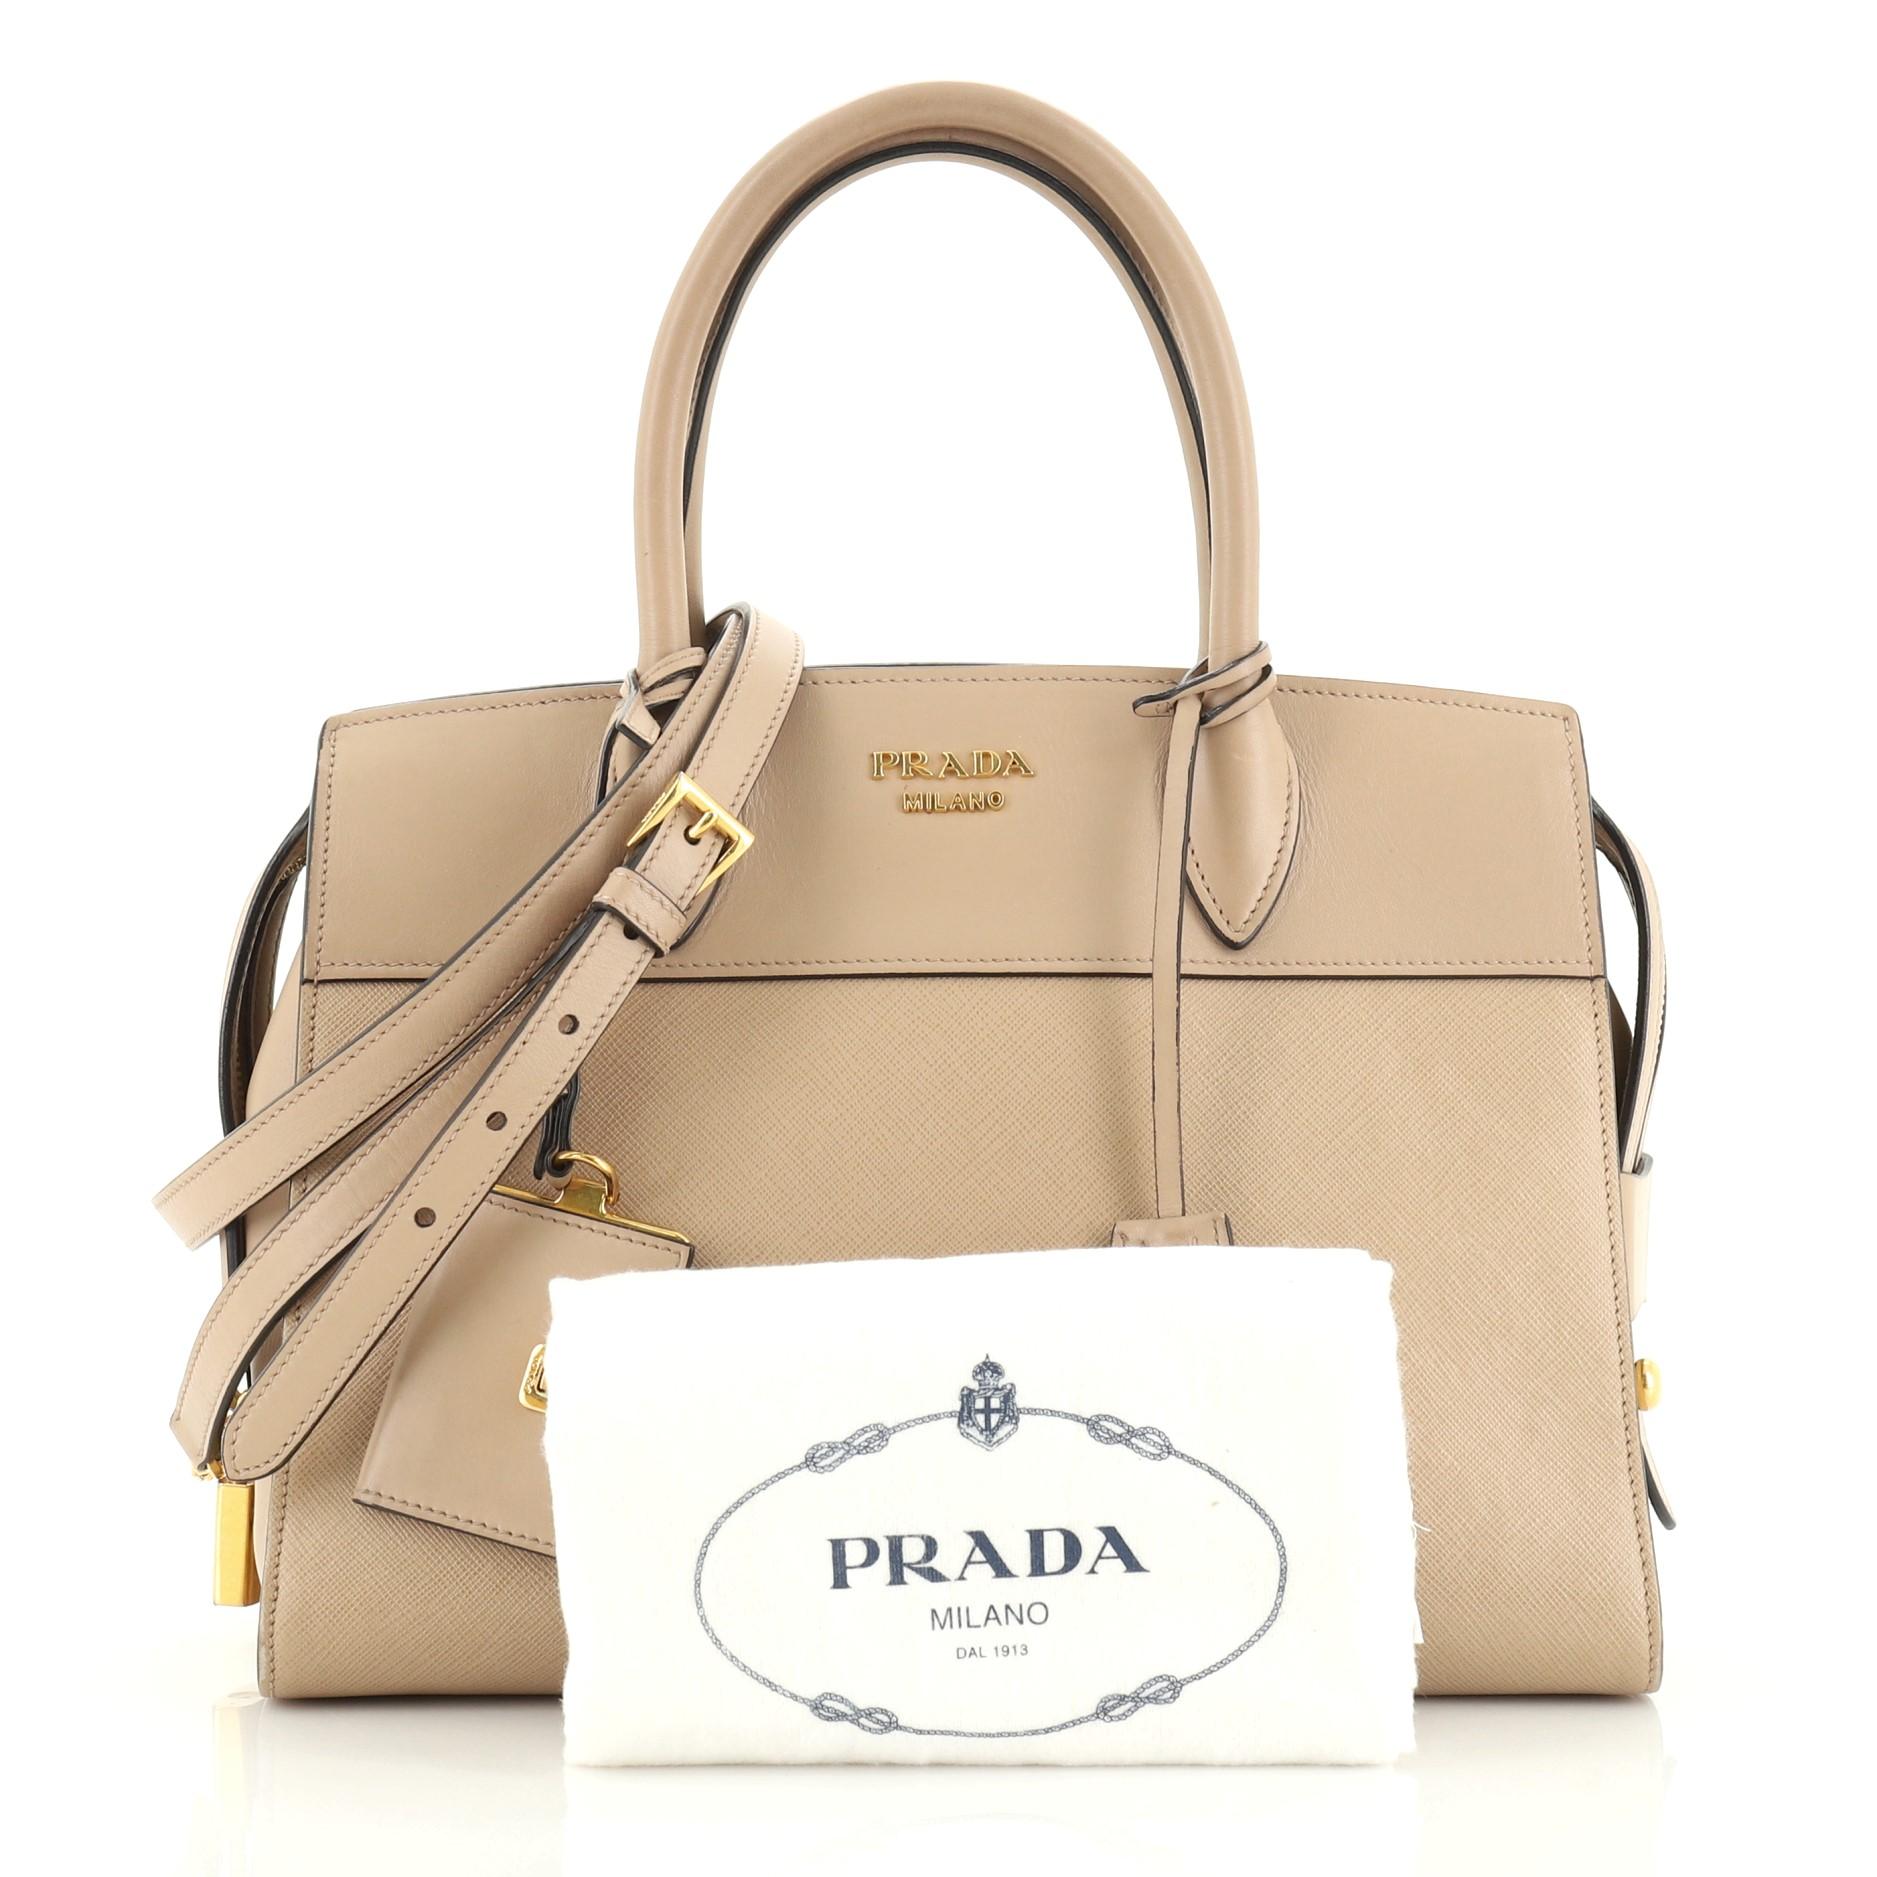 This Prada Esplanade Bag Saffiano Leather Medium, crafted in neutral saffiano leather, features dual rolled leather handles, Prada metal logo at center and gold-tone hardware. Its zip closure opens to a black and neutral leather interior with zip